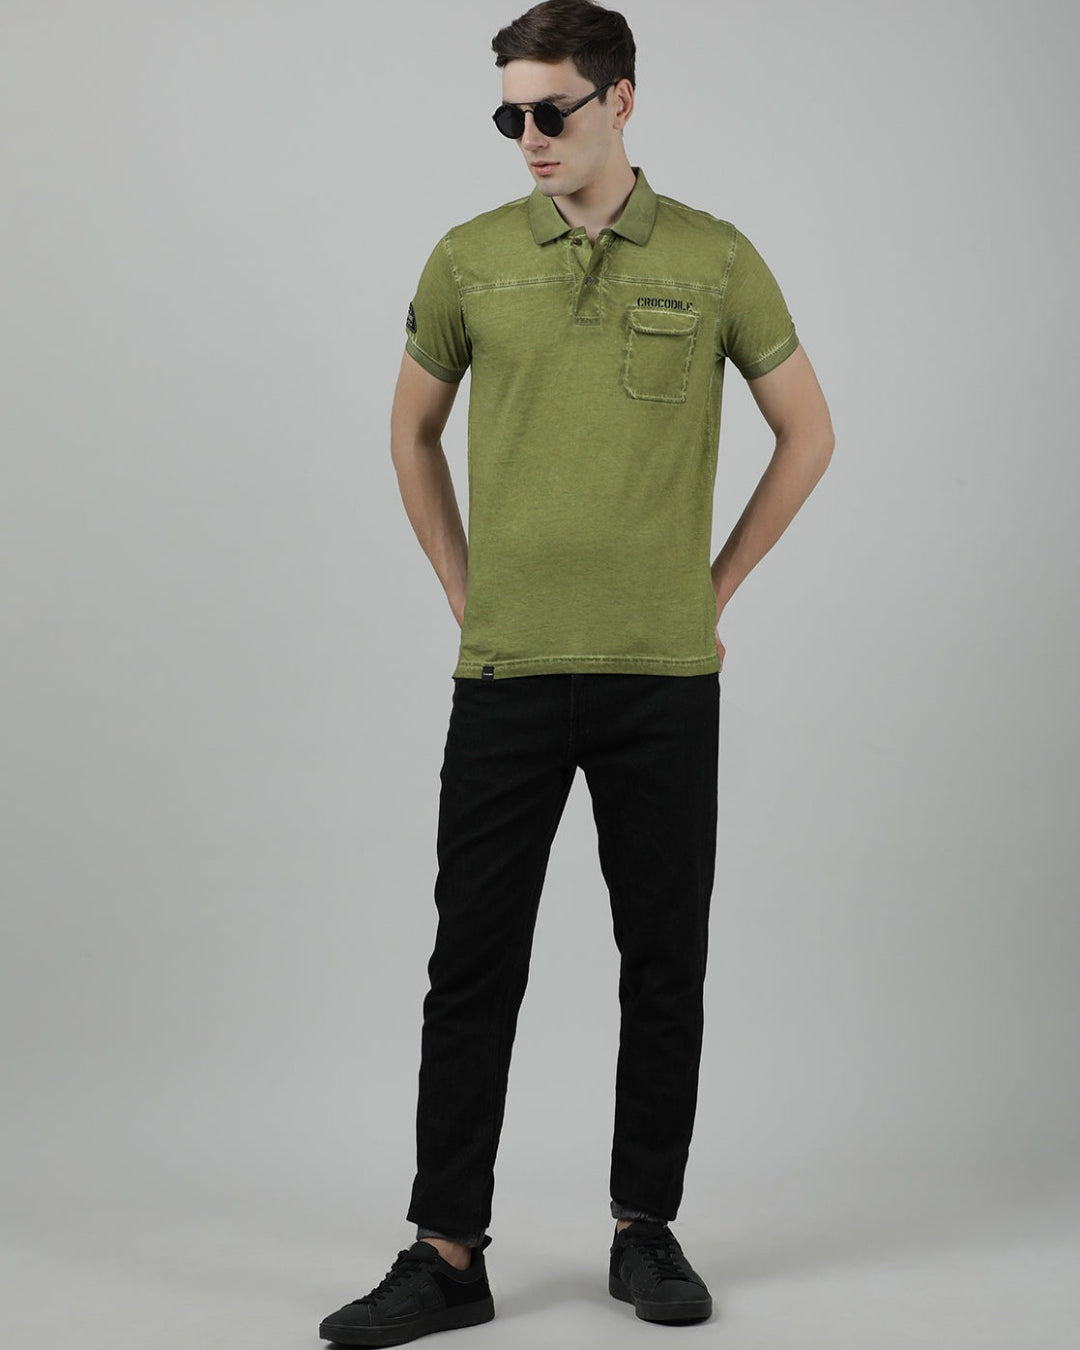 Crocodile Casual Green T-Shirt Half Sleeve Slim Fit with Collar for Men